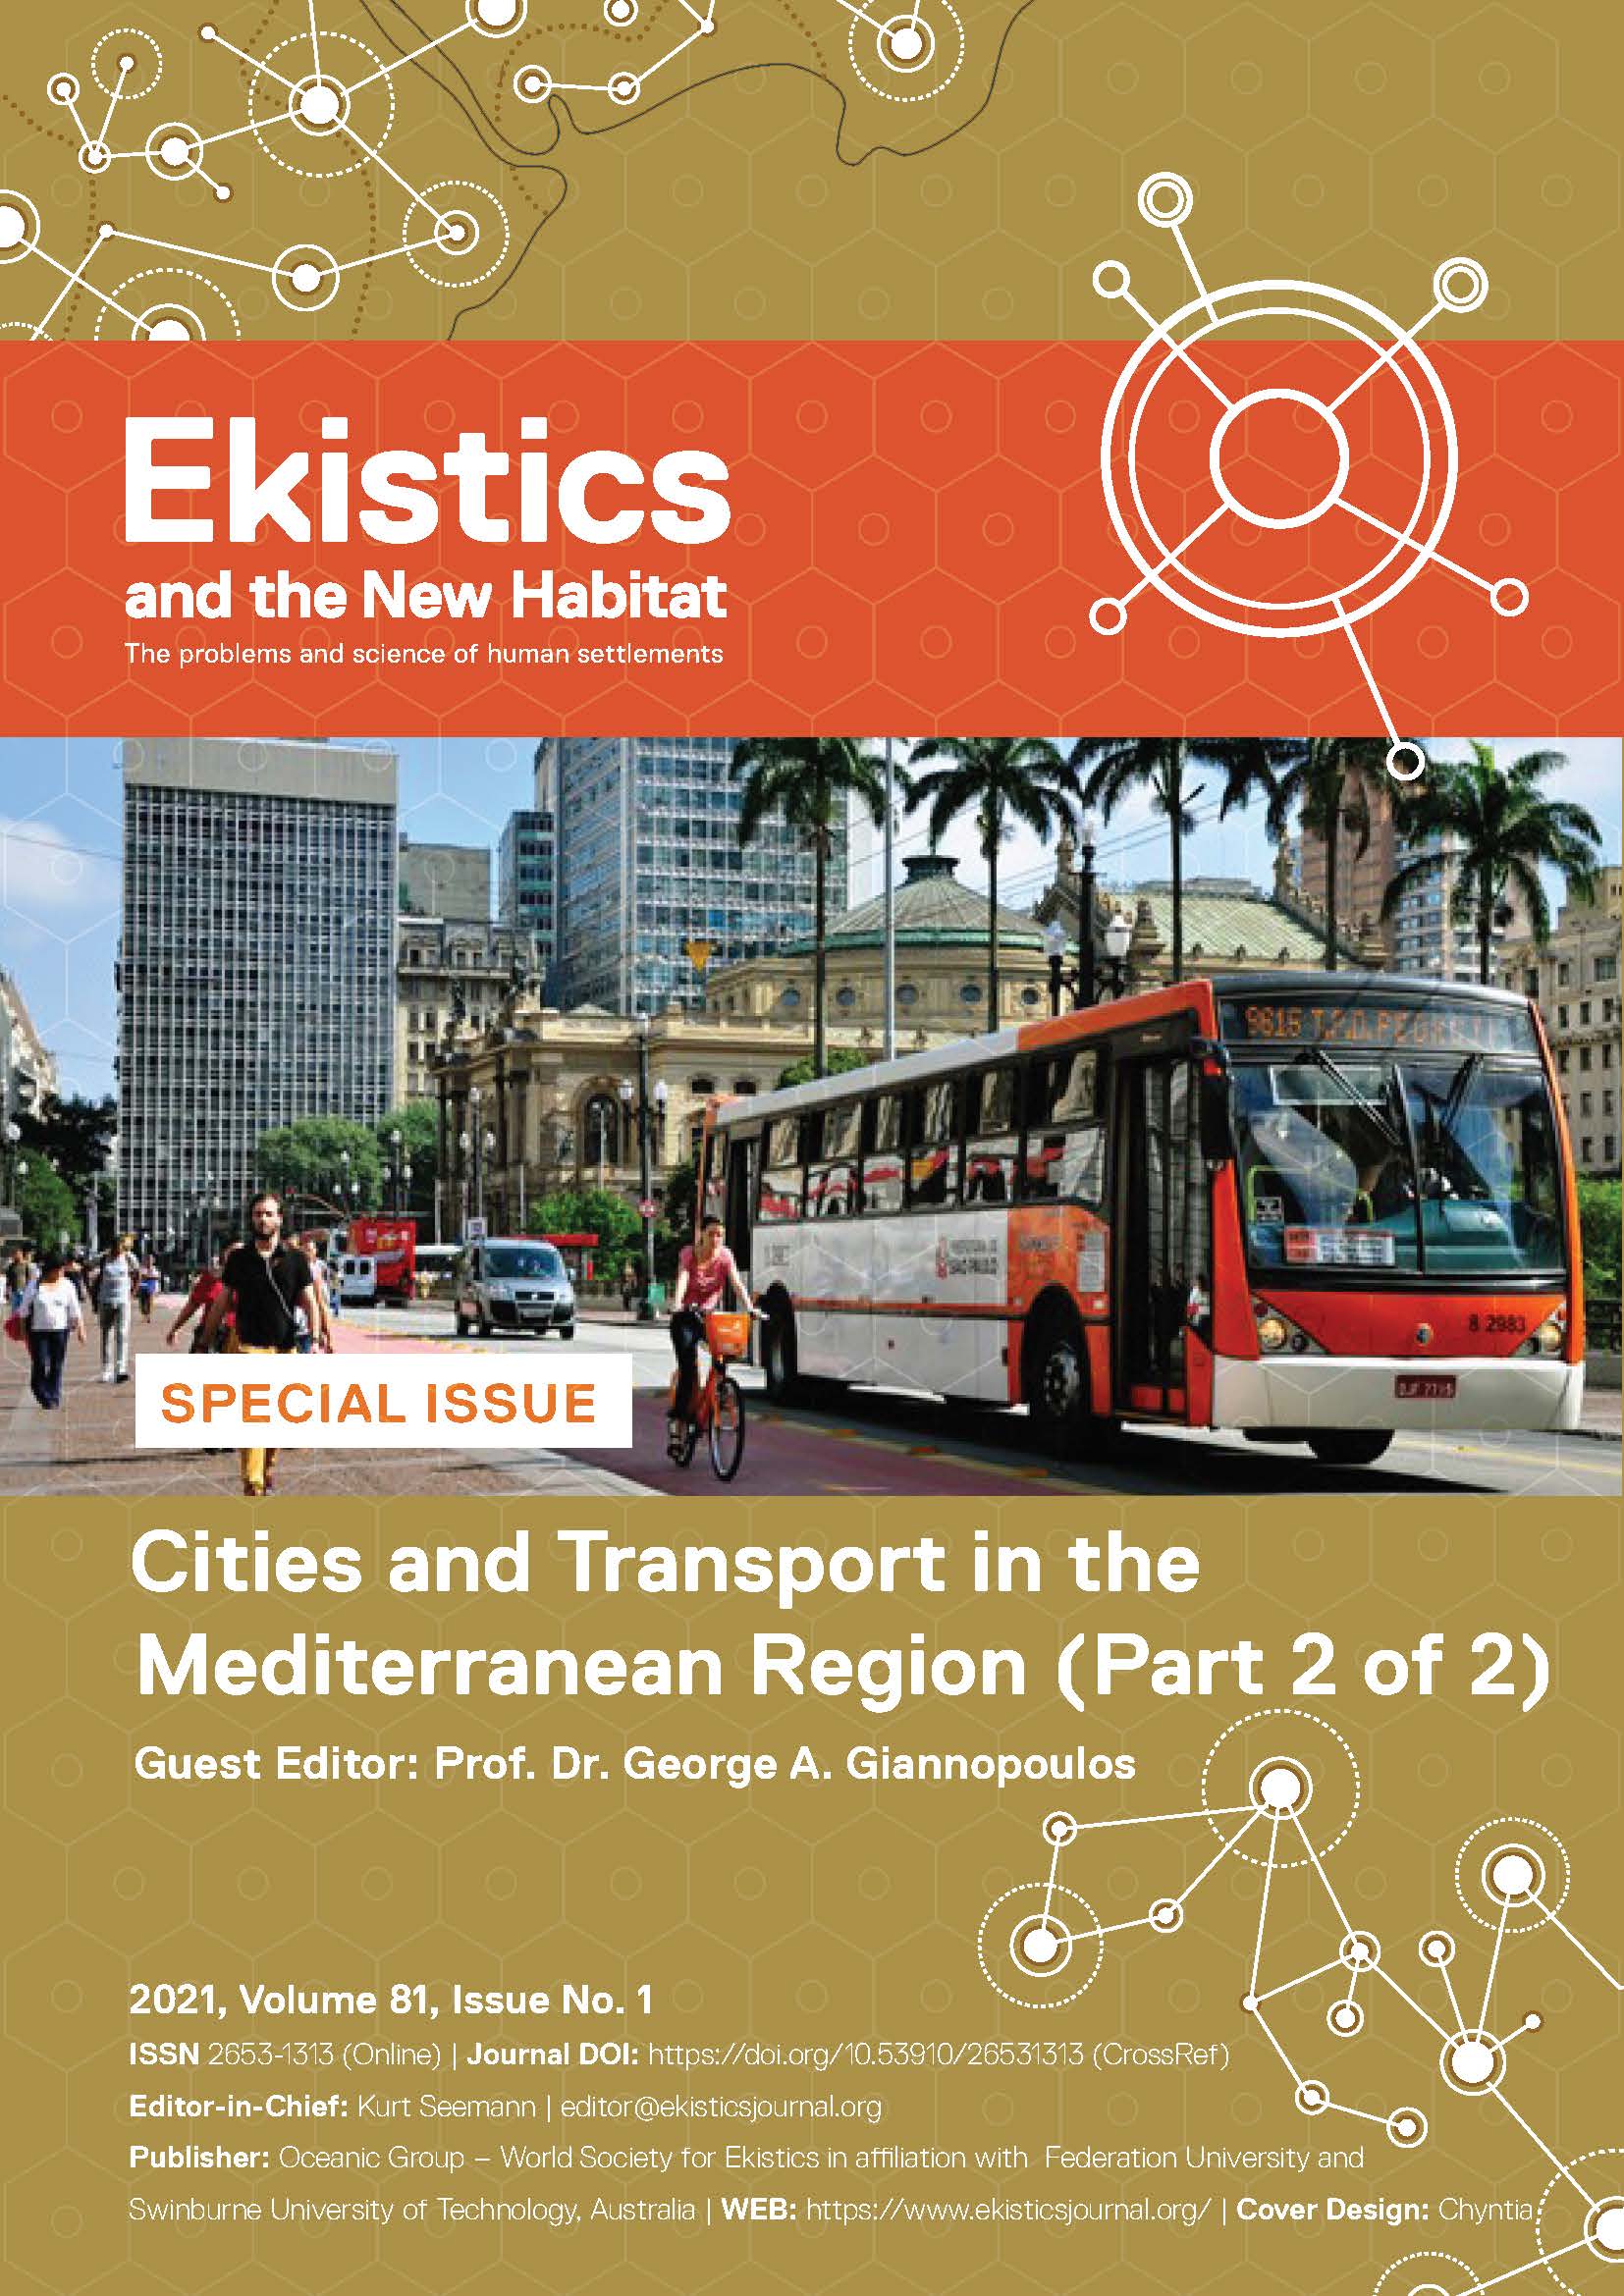 					View Vol. 81 No. 1 (2021): Cities and Transport in the Mediterranean Region (Part 2 of 2)
				